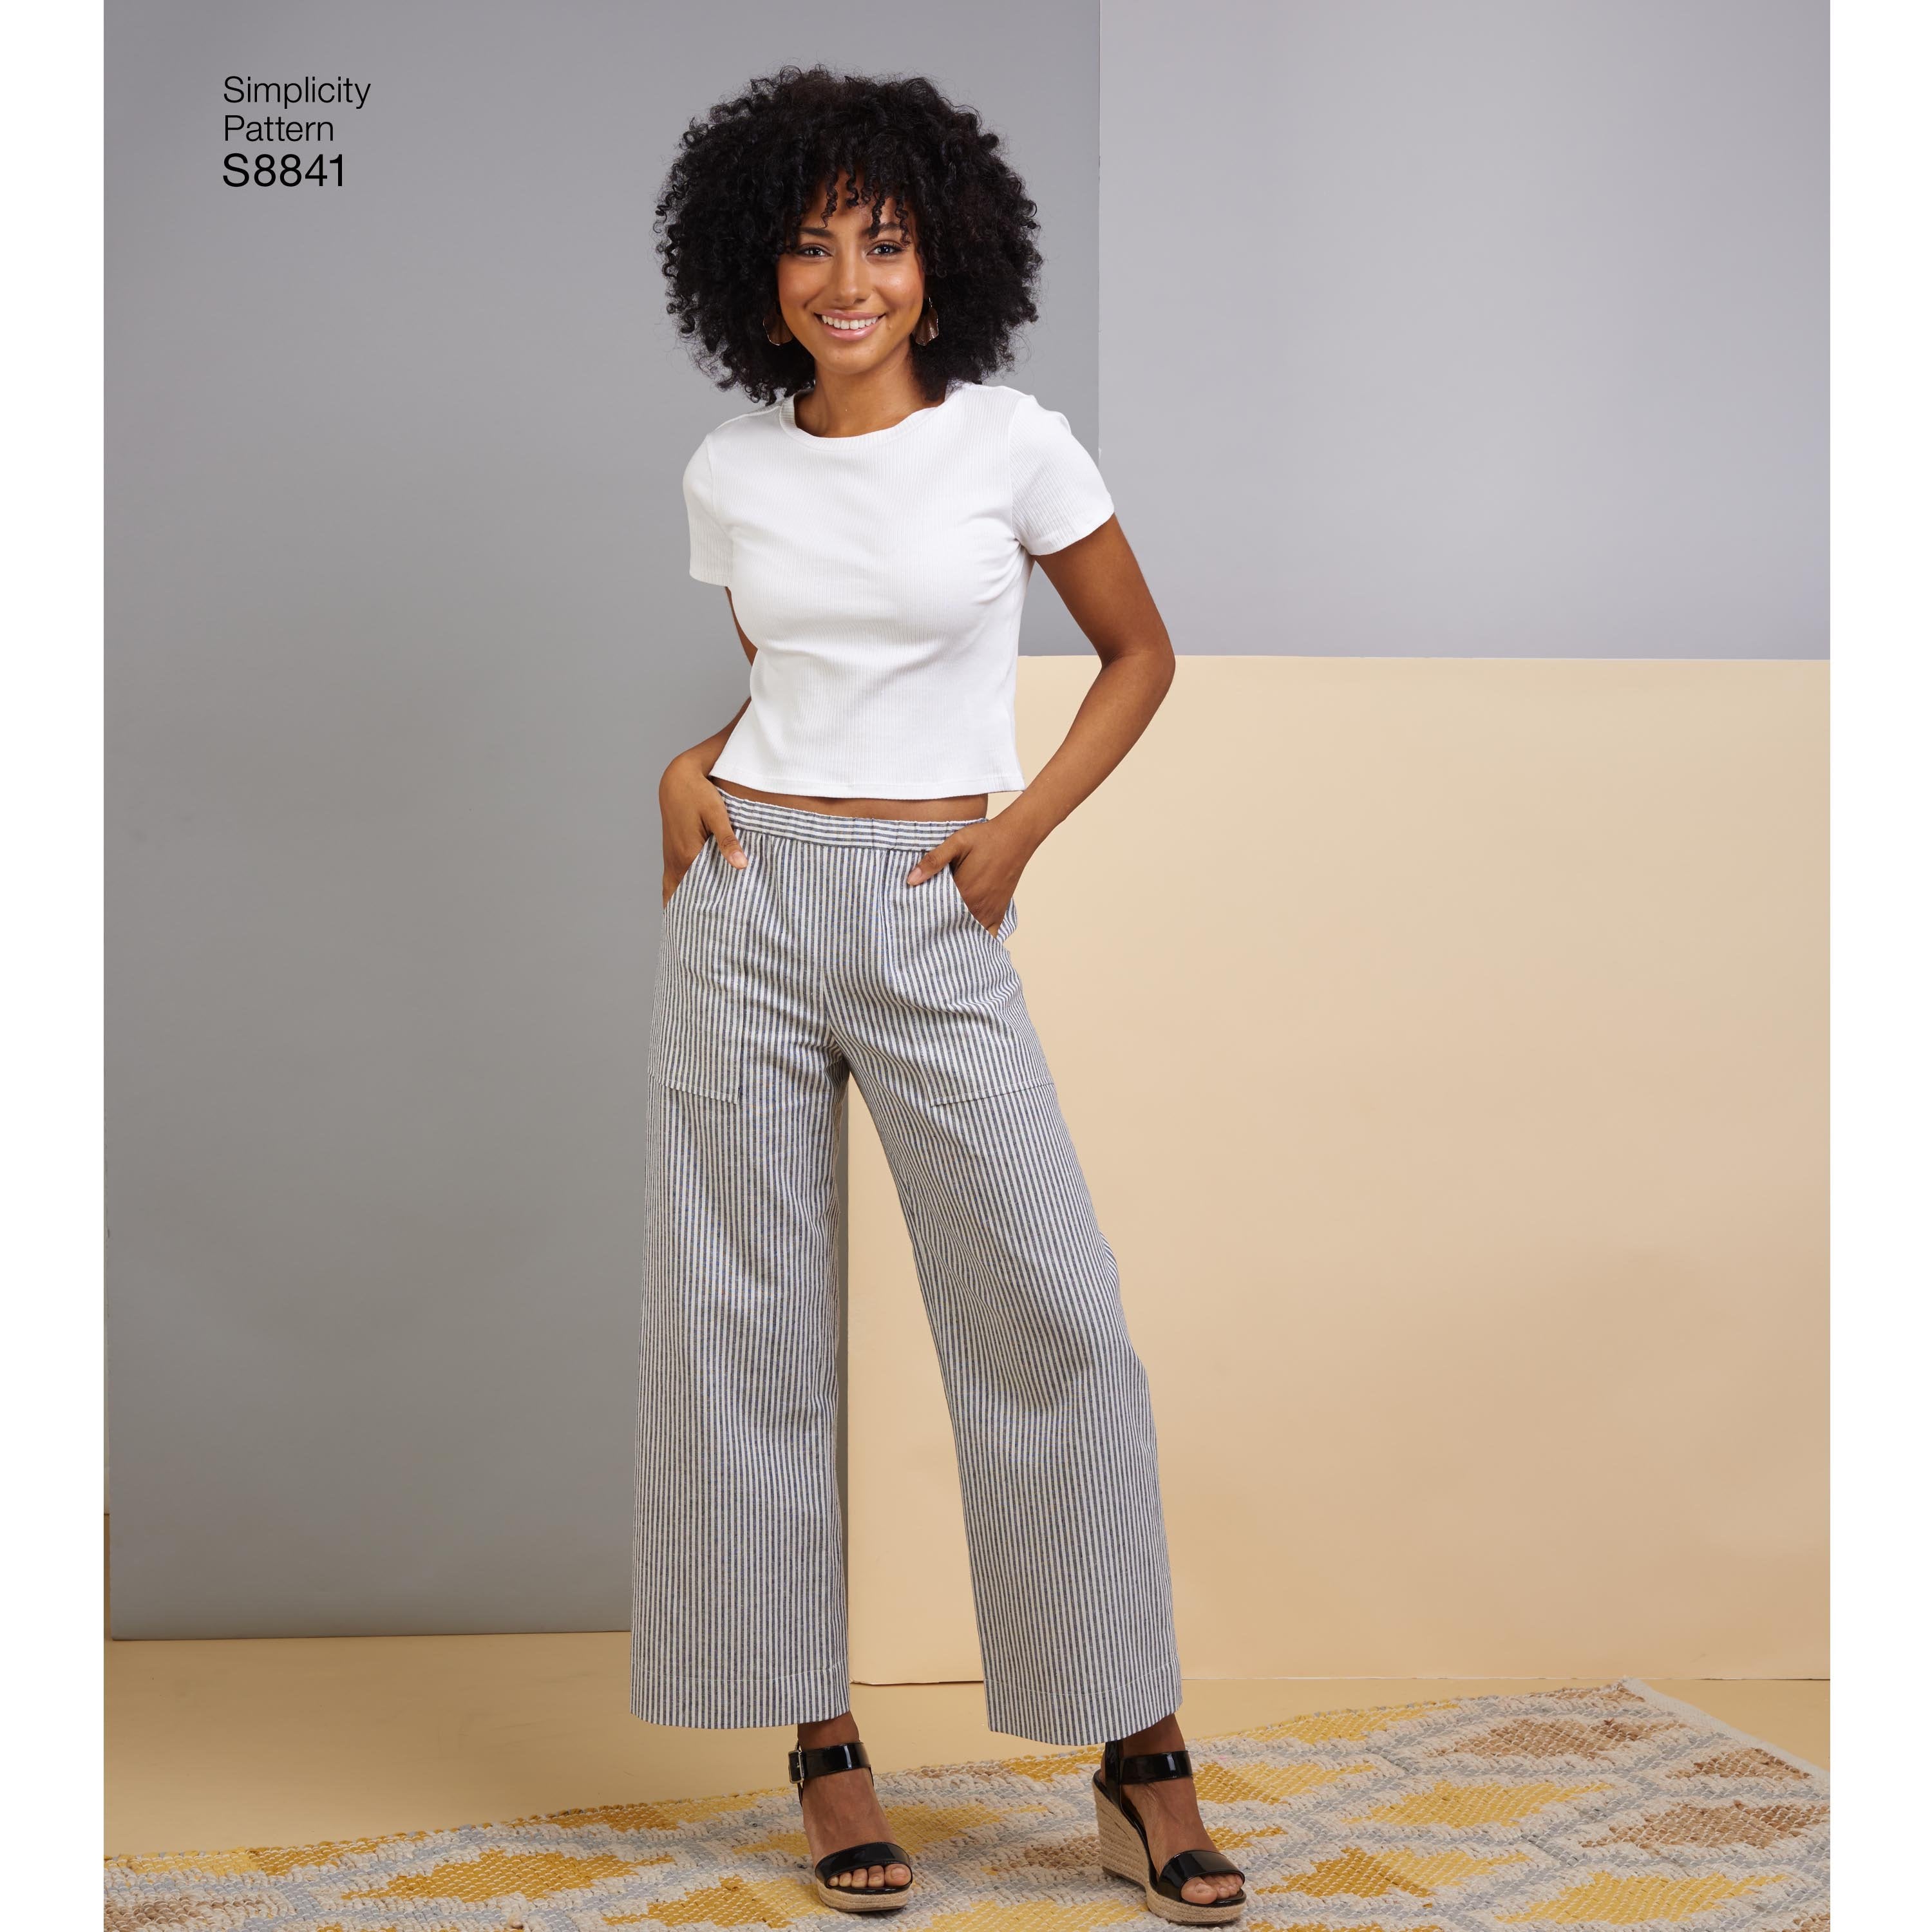 Simplicity Pattern 8841 This easy to sew pull on pants from Jaycotts Sewing Supplies